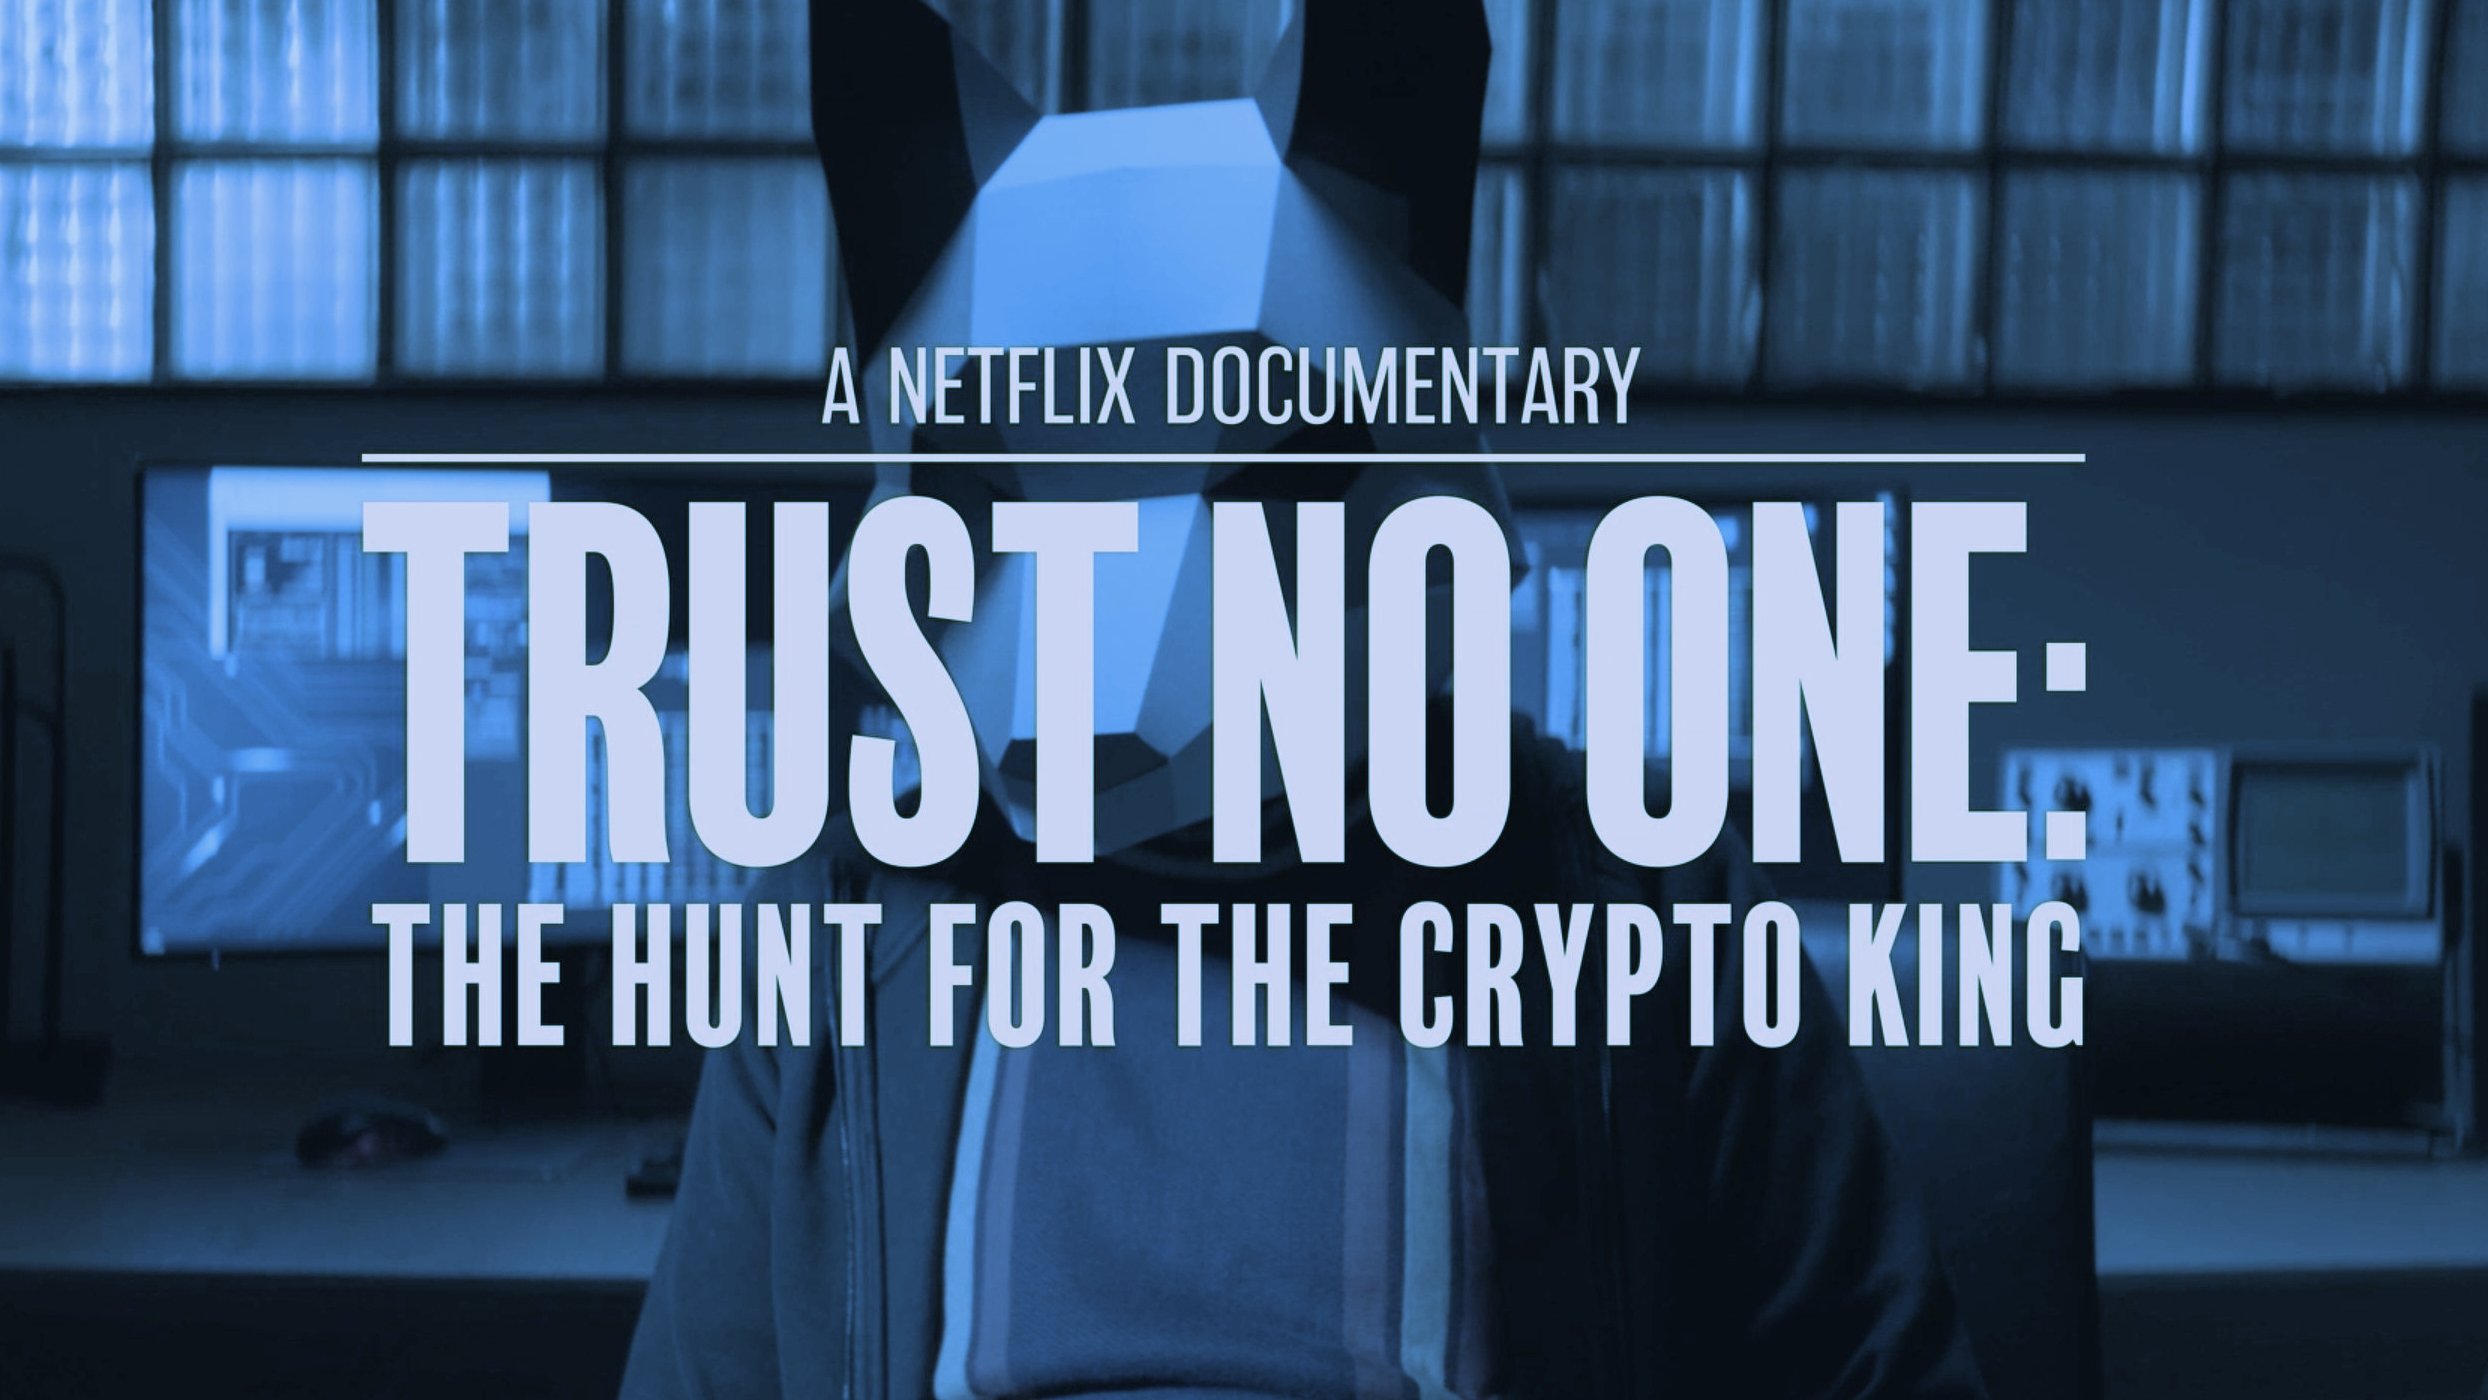 Trust no one the hunt for the crypto king